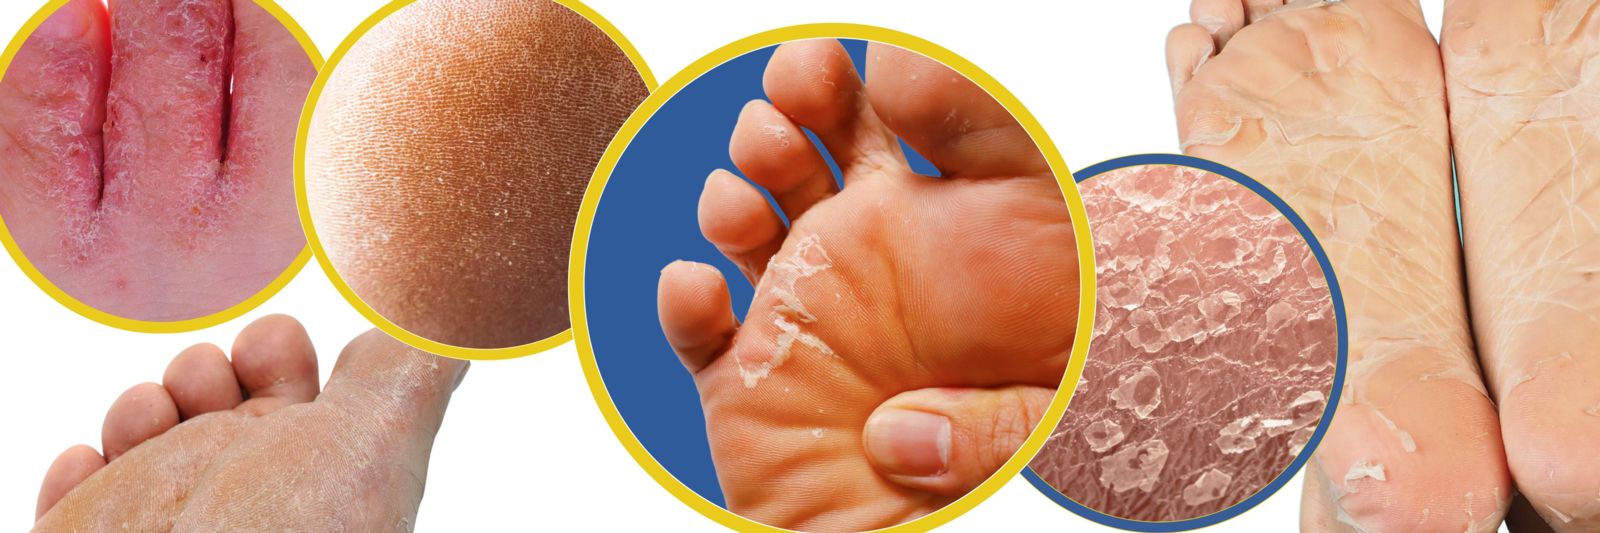 How to Remove Dead Skin from Your Feet - ePodiatrists